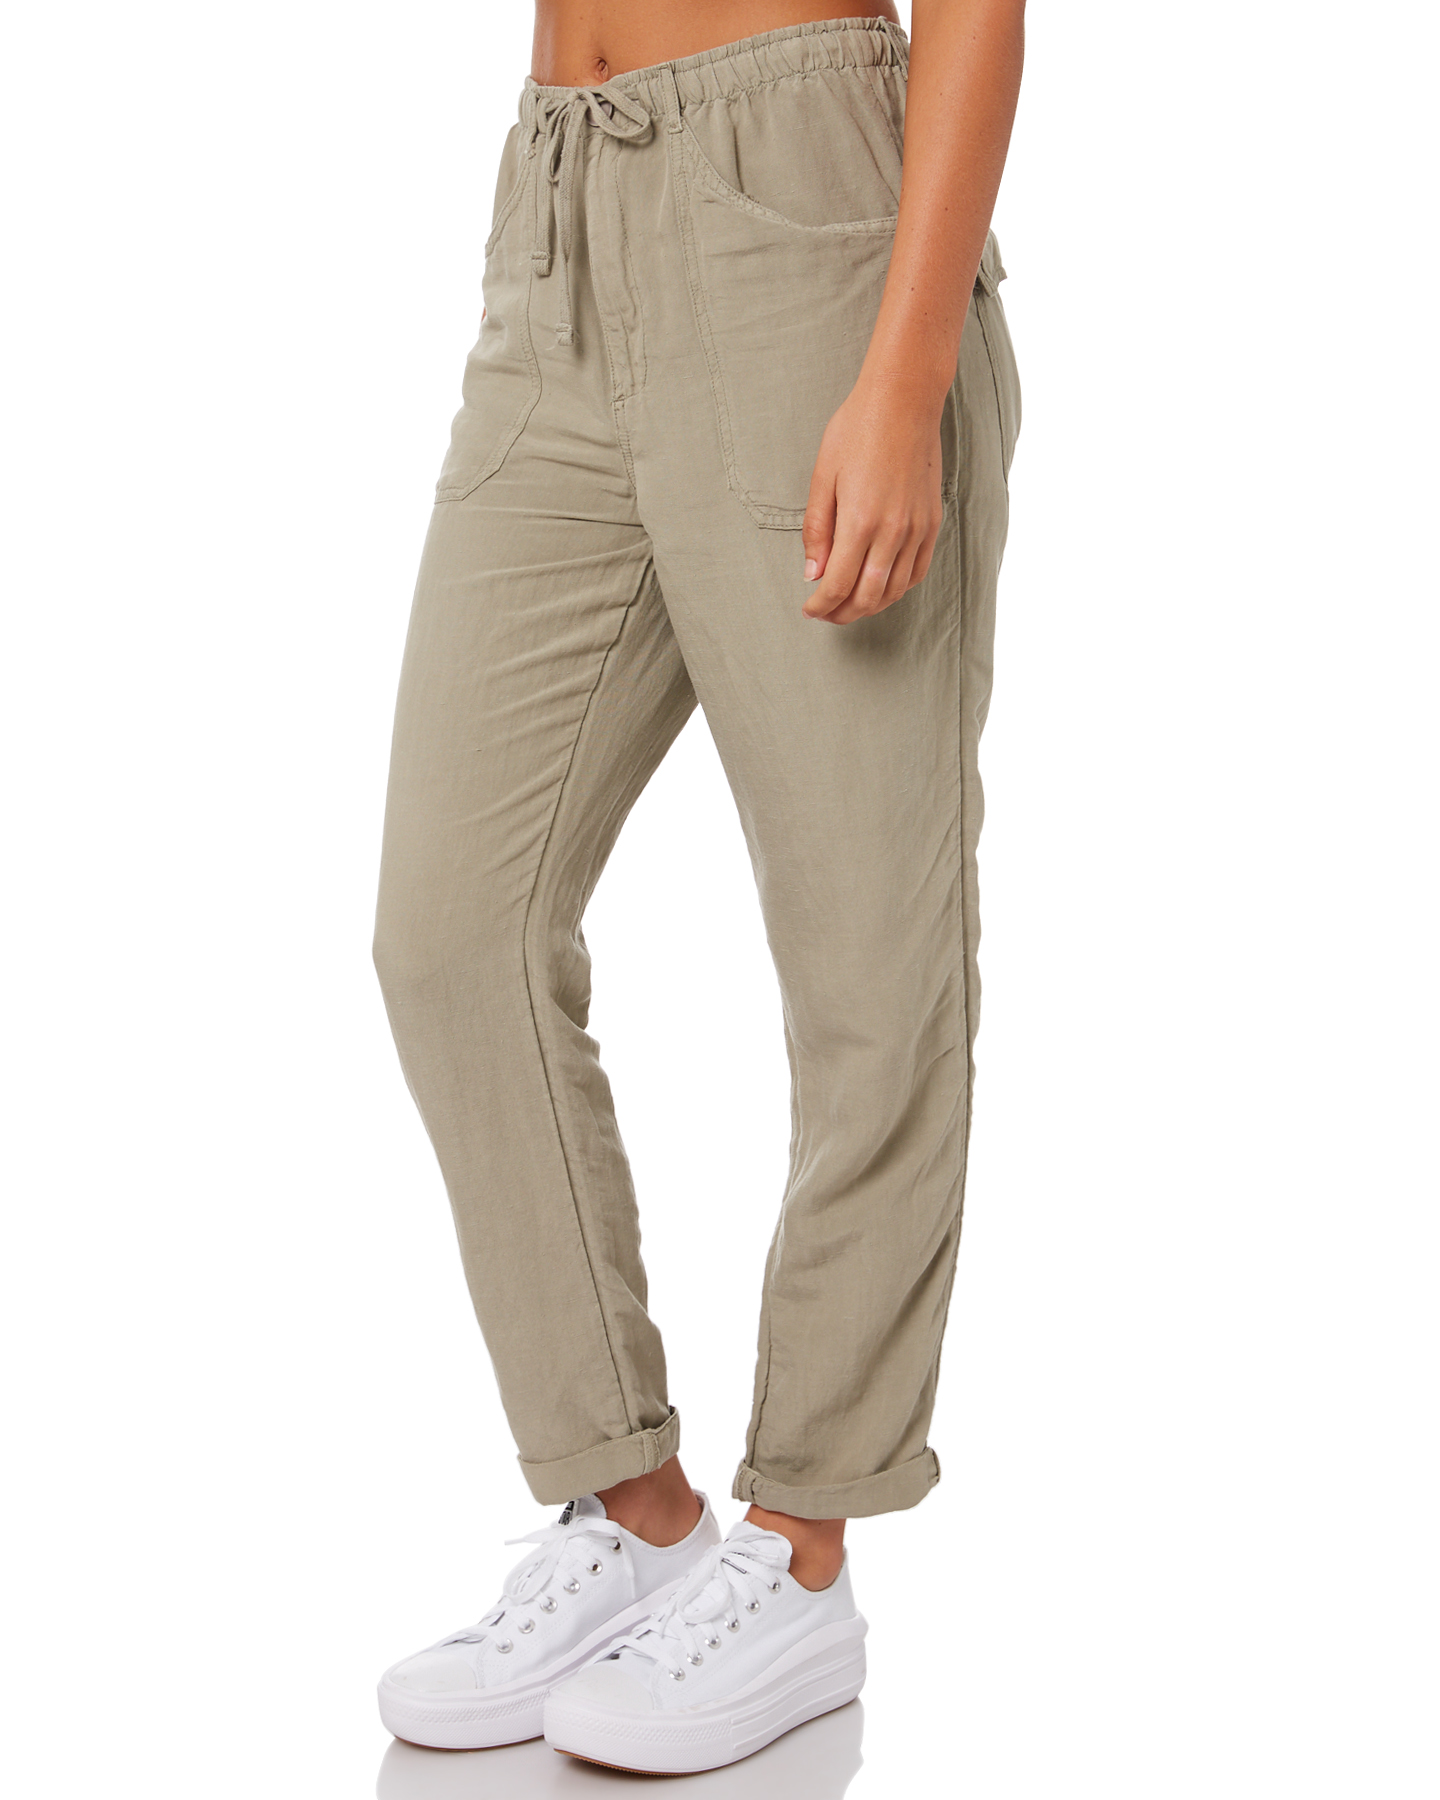 Rip Curl Panoma Pant - Stone Green | SurfStitch